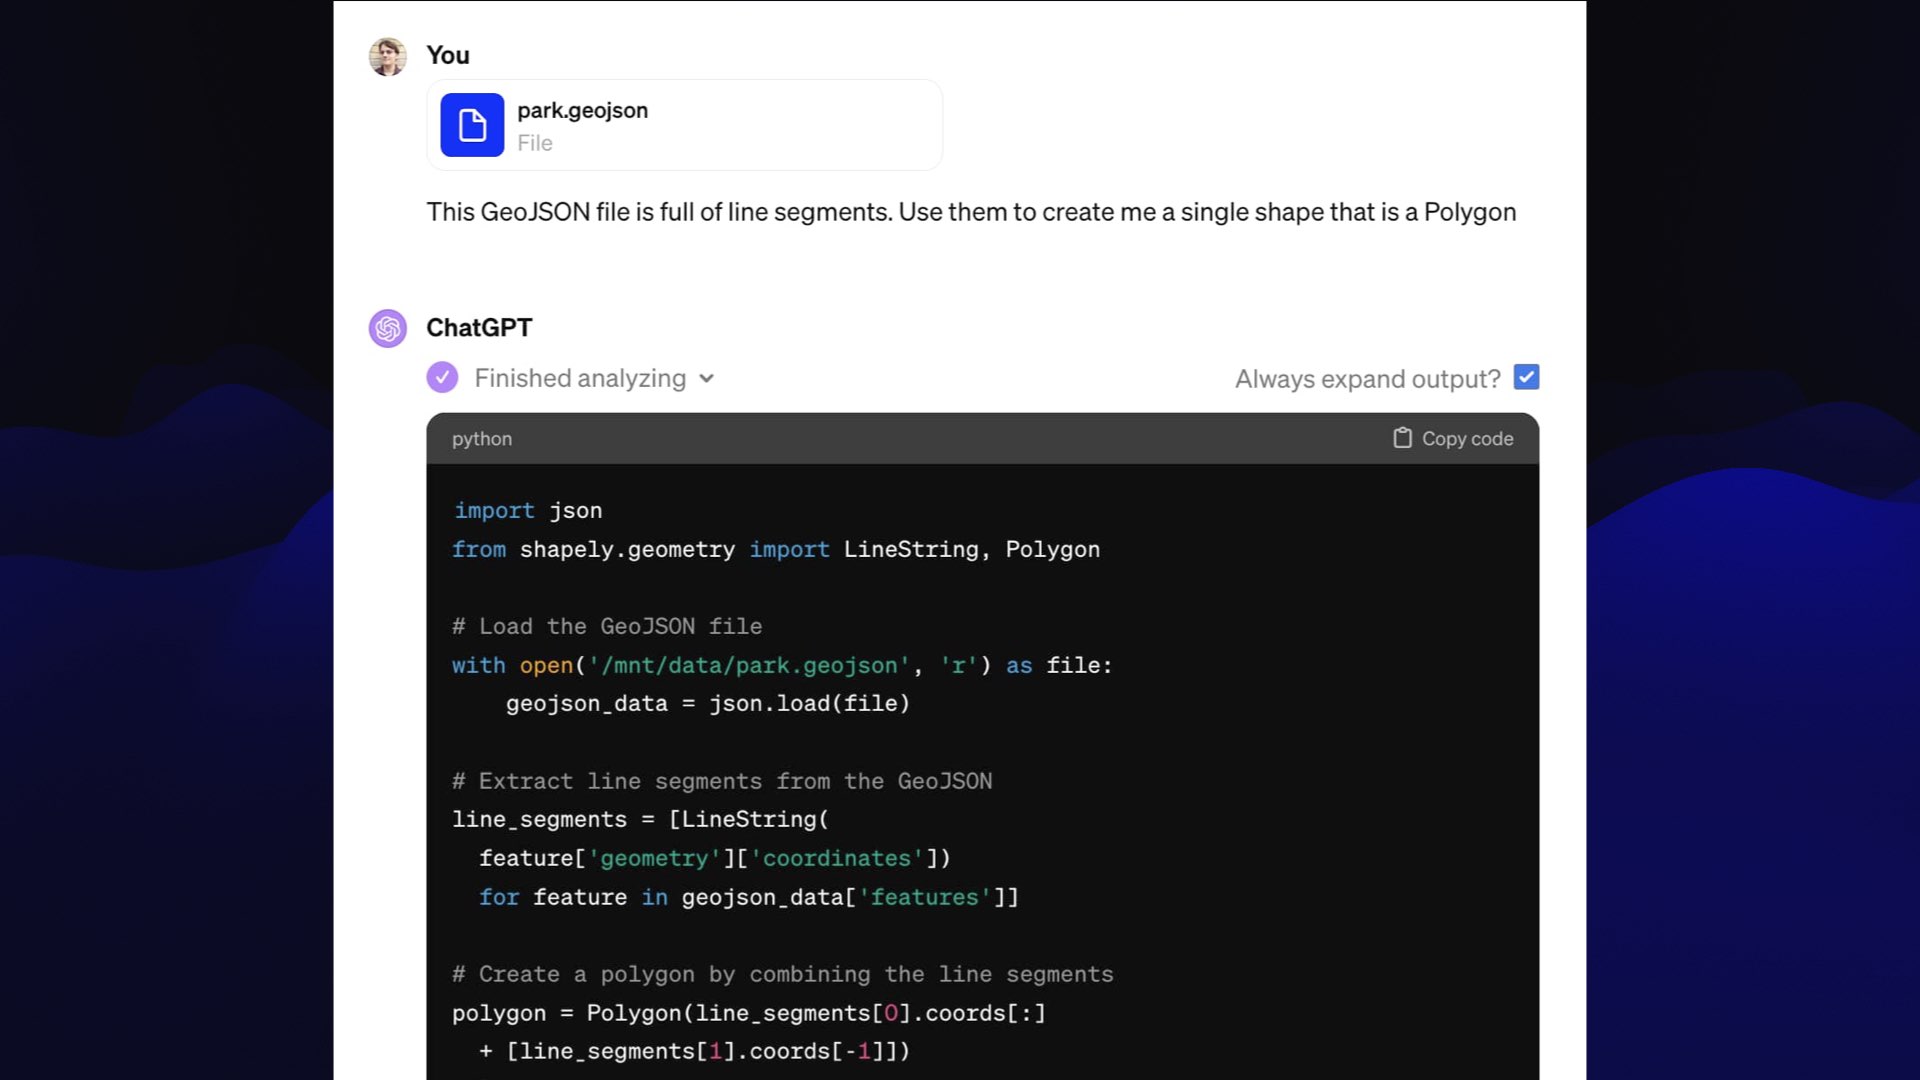 Uploaded file: park.geojson  You: This GeoJSON file is full of line segments. Use them to create me a single shape that is a Polygon  ChatGPT:  Finished analyzing  import json from shapely.geometry LineString, Polygon  # Load the GeoJSON file ...